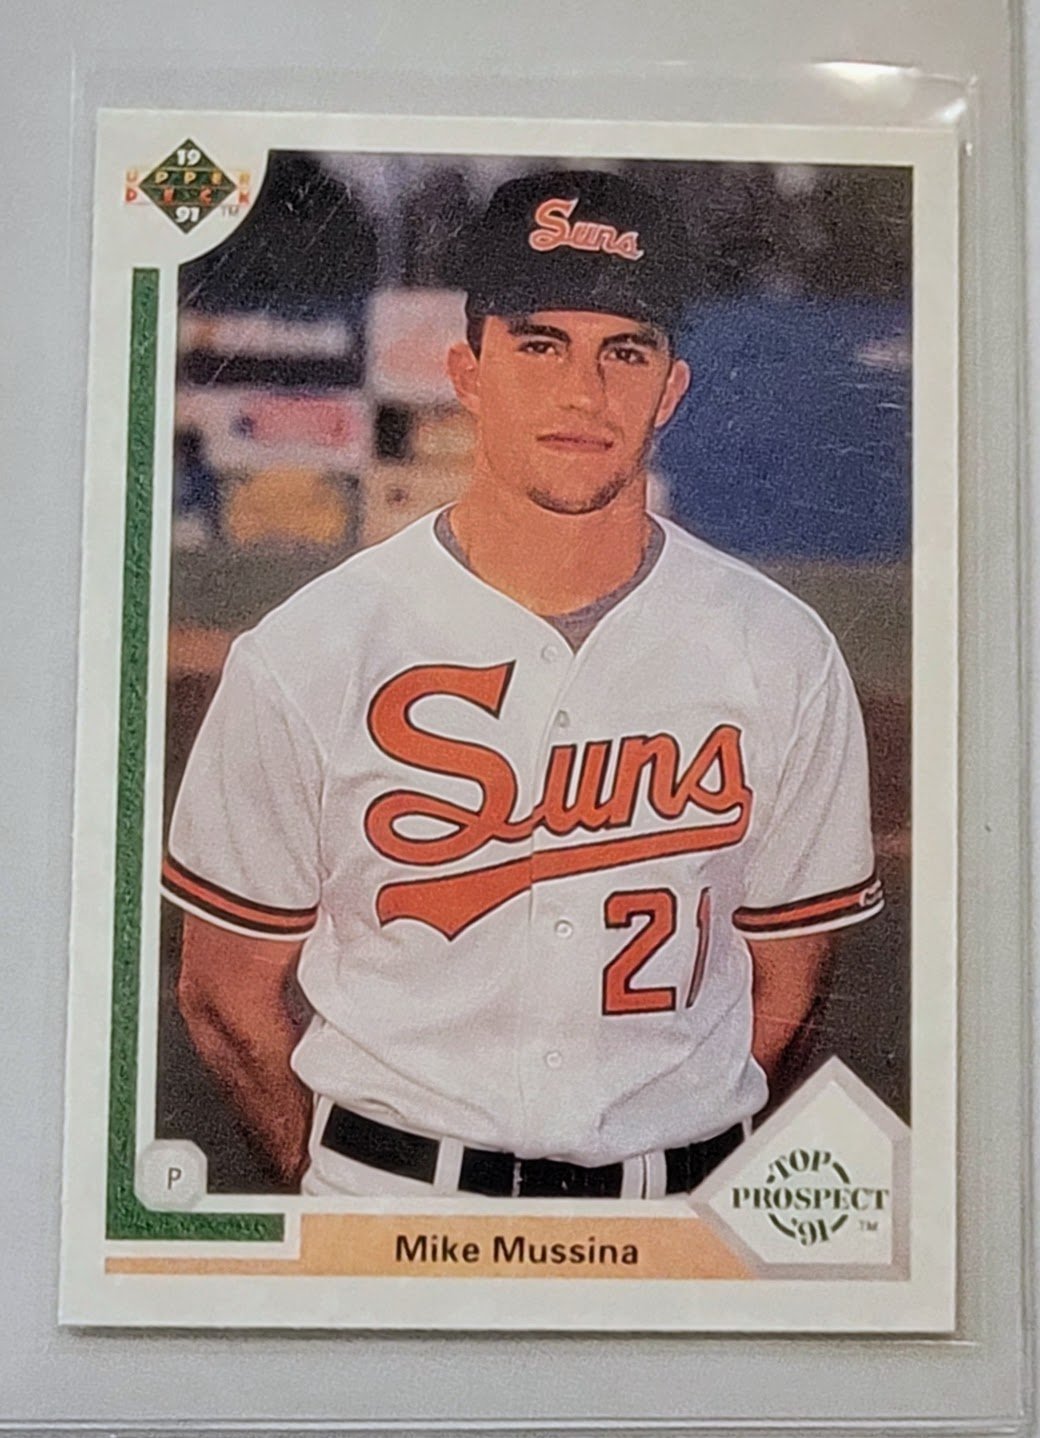 1991 Mike Mussina Top Prospect Rookie Baseball Card TPTV simple Xclusive Collectibles   